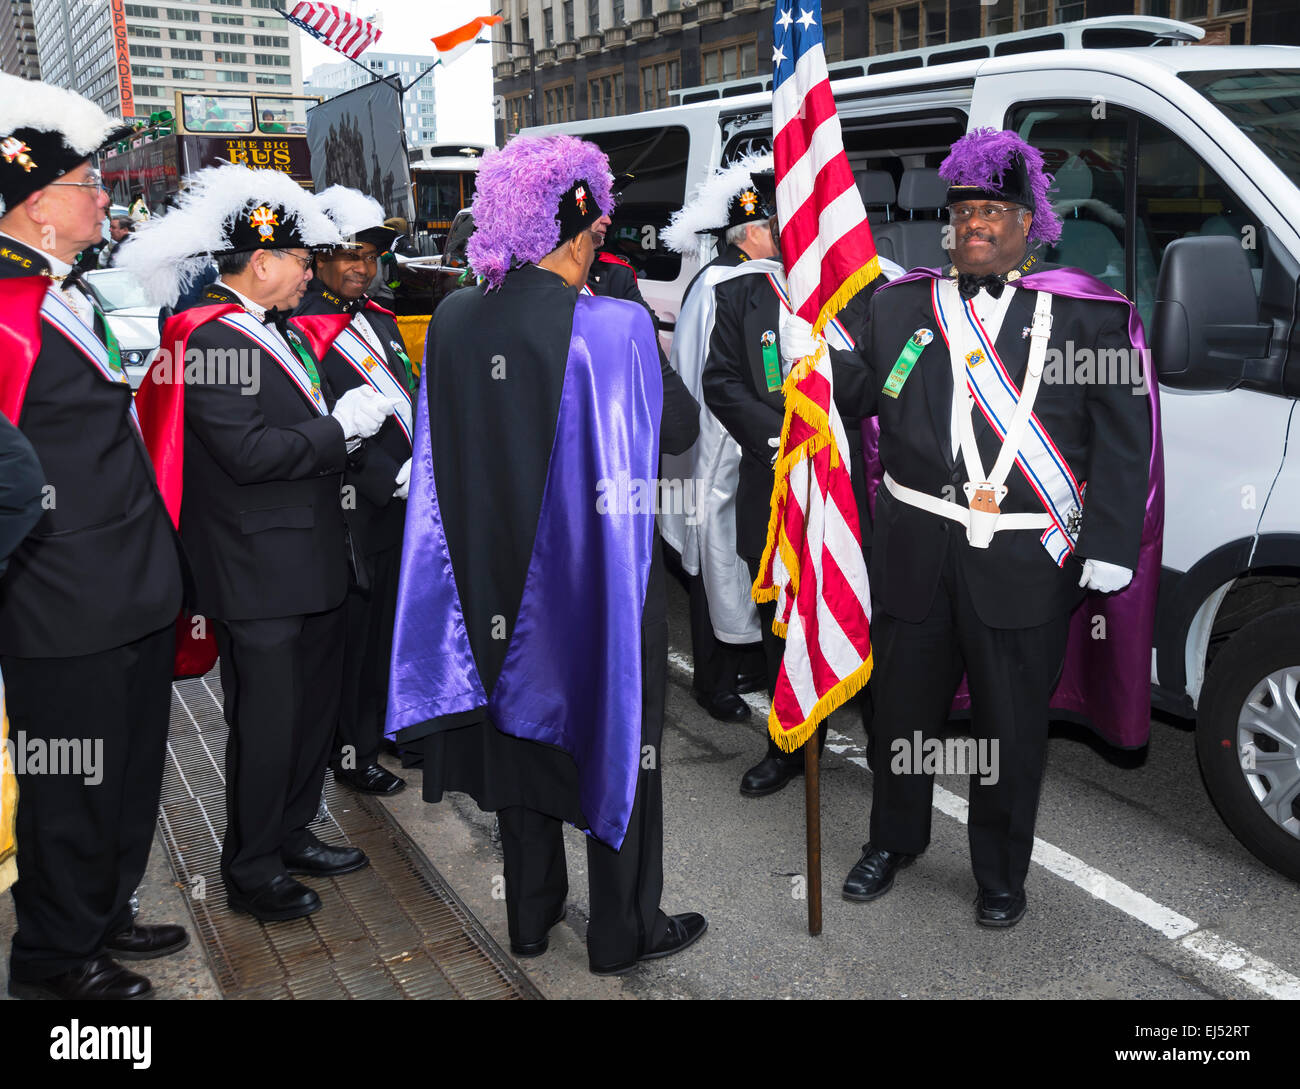 Honored guests in formal attire with American flag, St. Patrick's Day Parade; Philadelphia Stock Photo